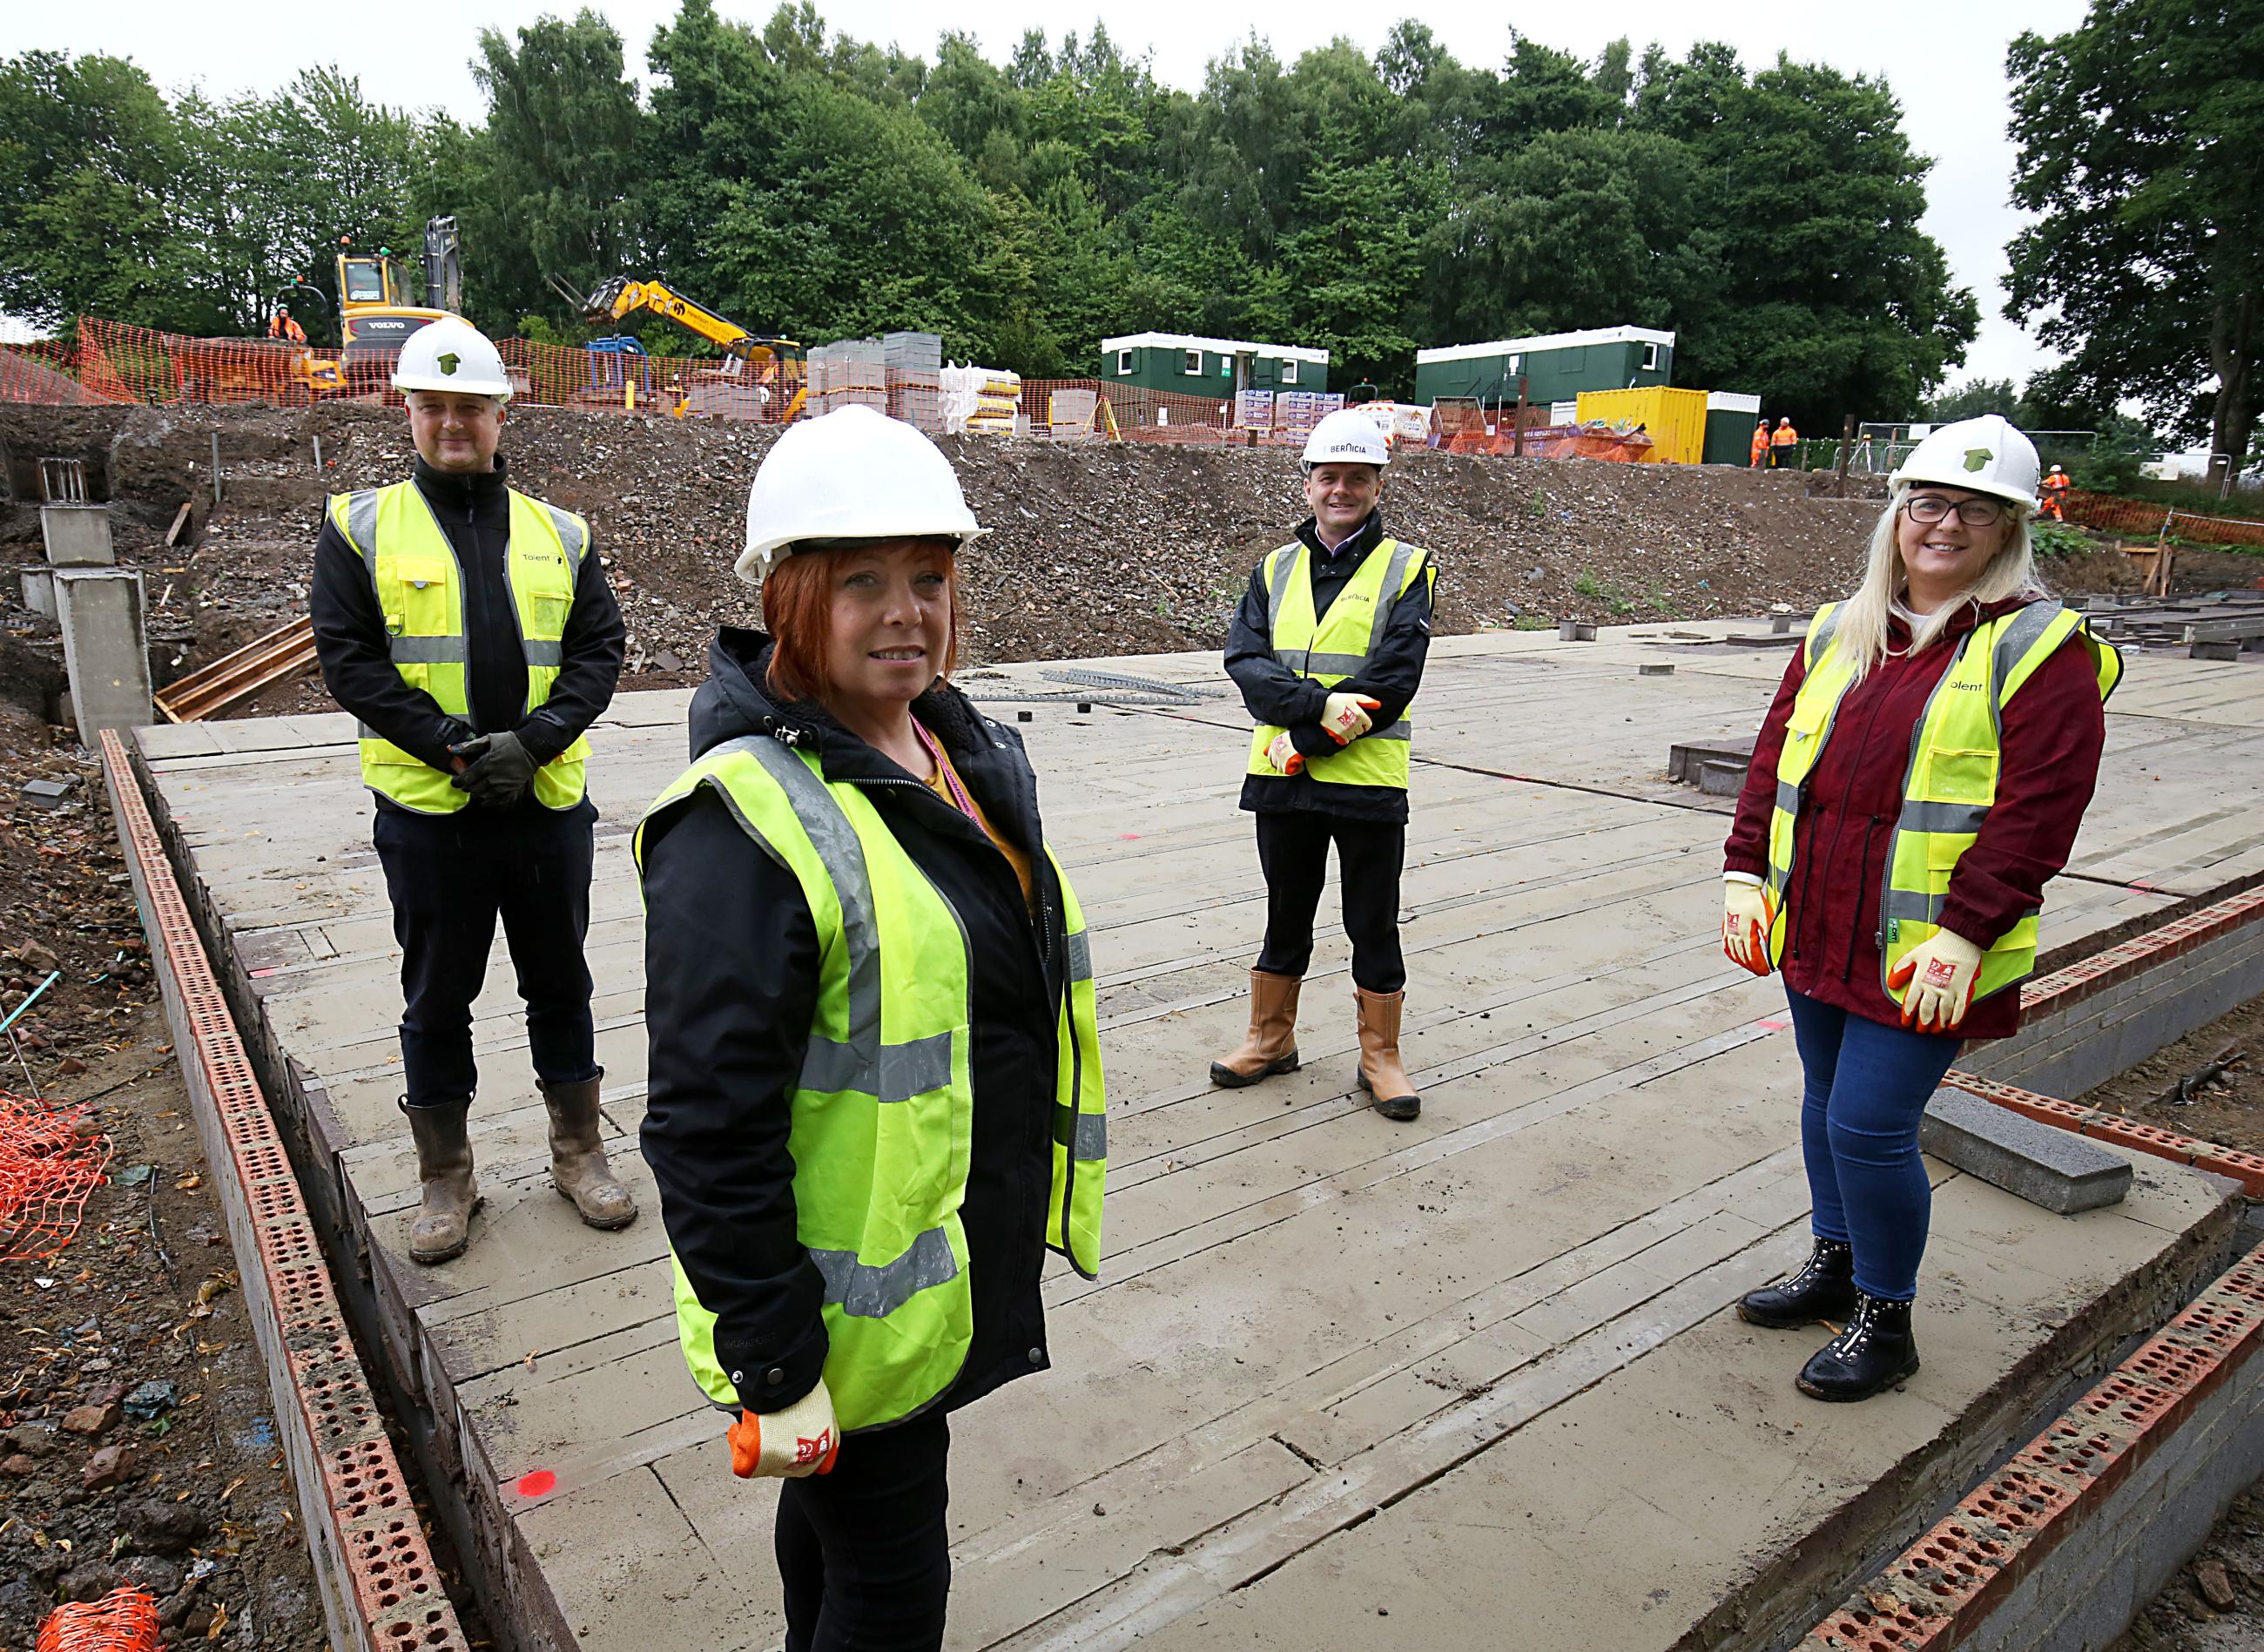 Councillor Linda Hobson met representatives from Tolent, Bernicia and the council's fairer housing unit at a visit to the site at Park Road 